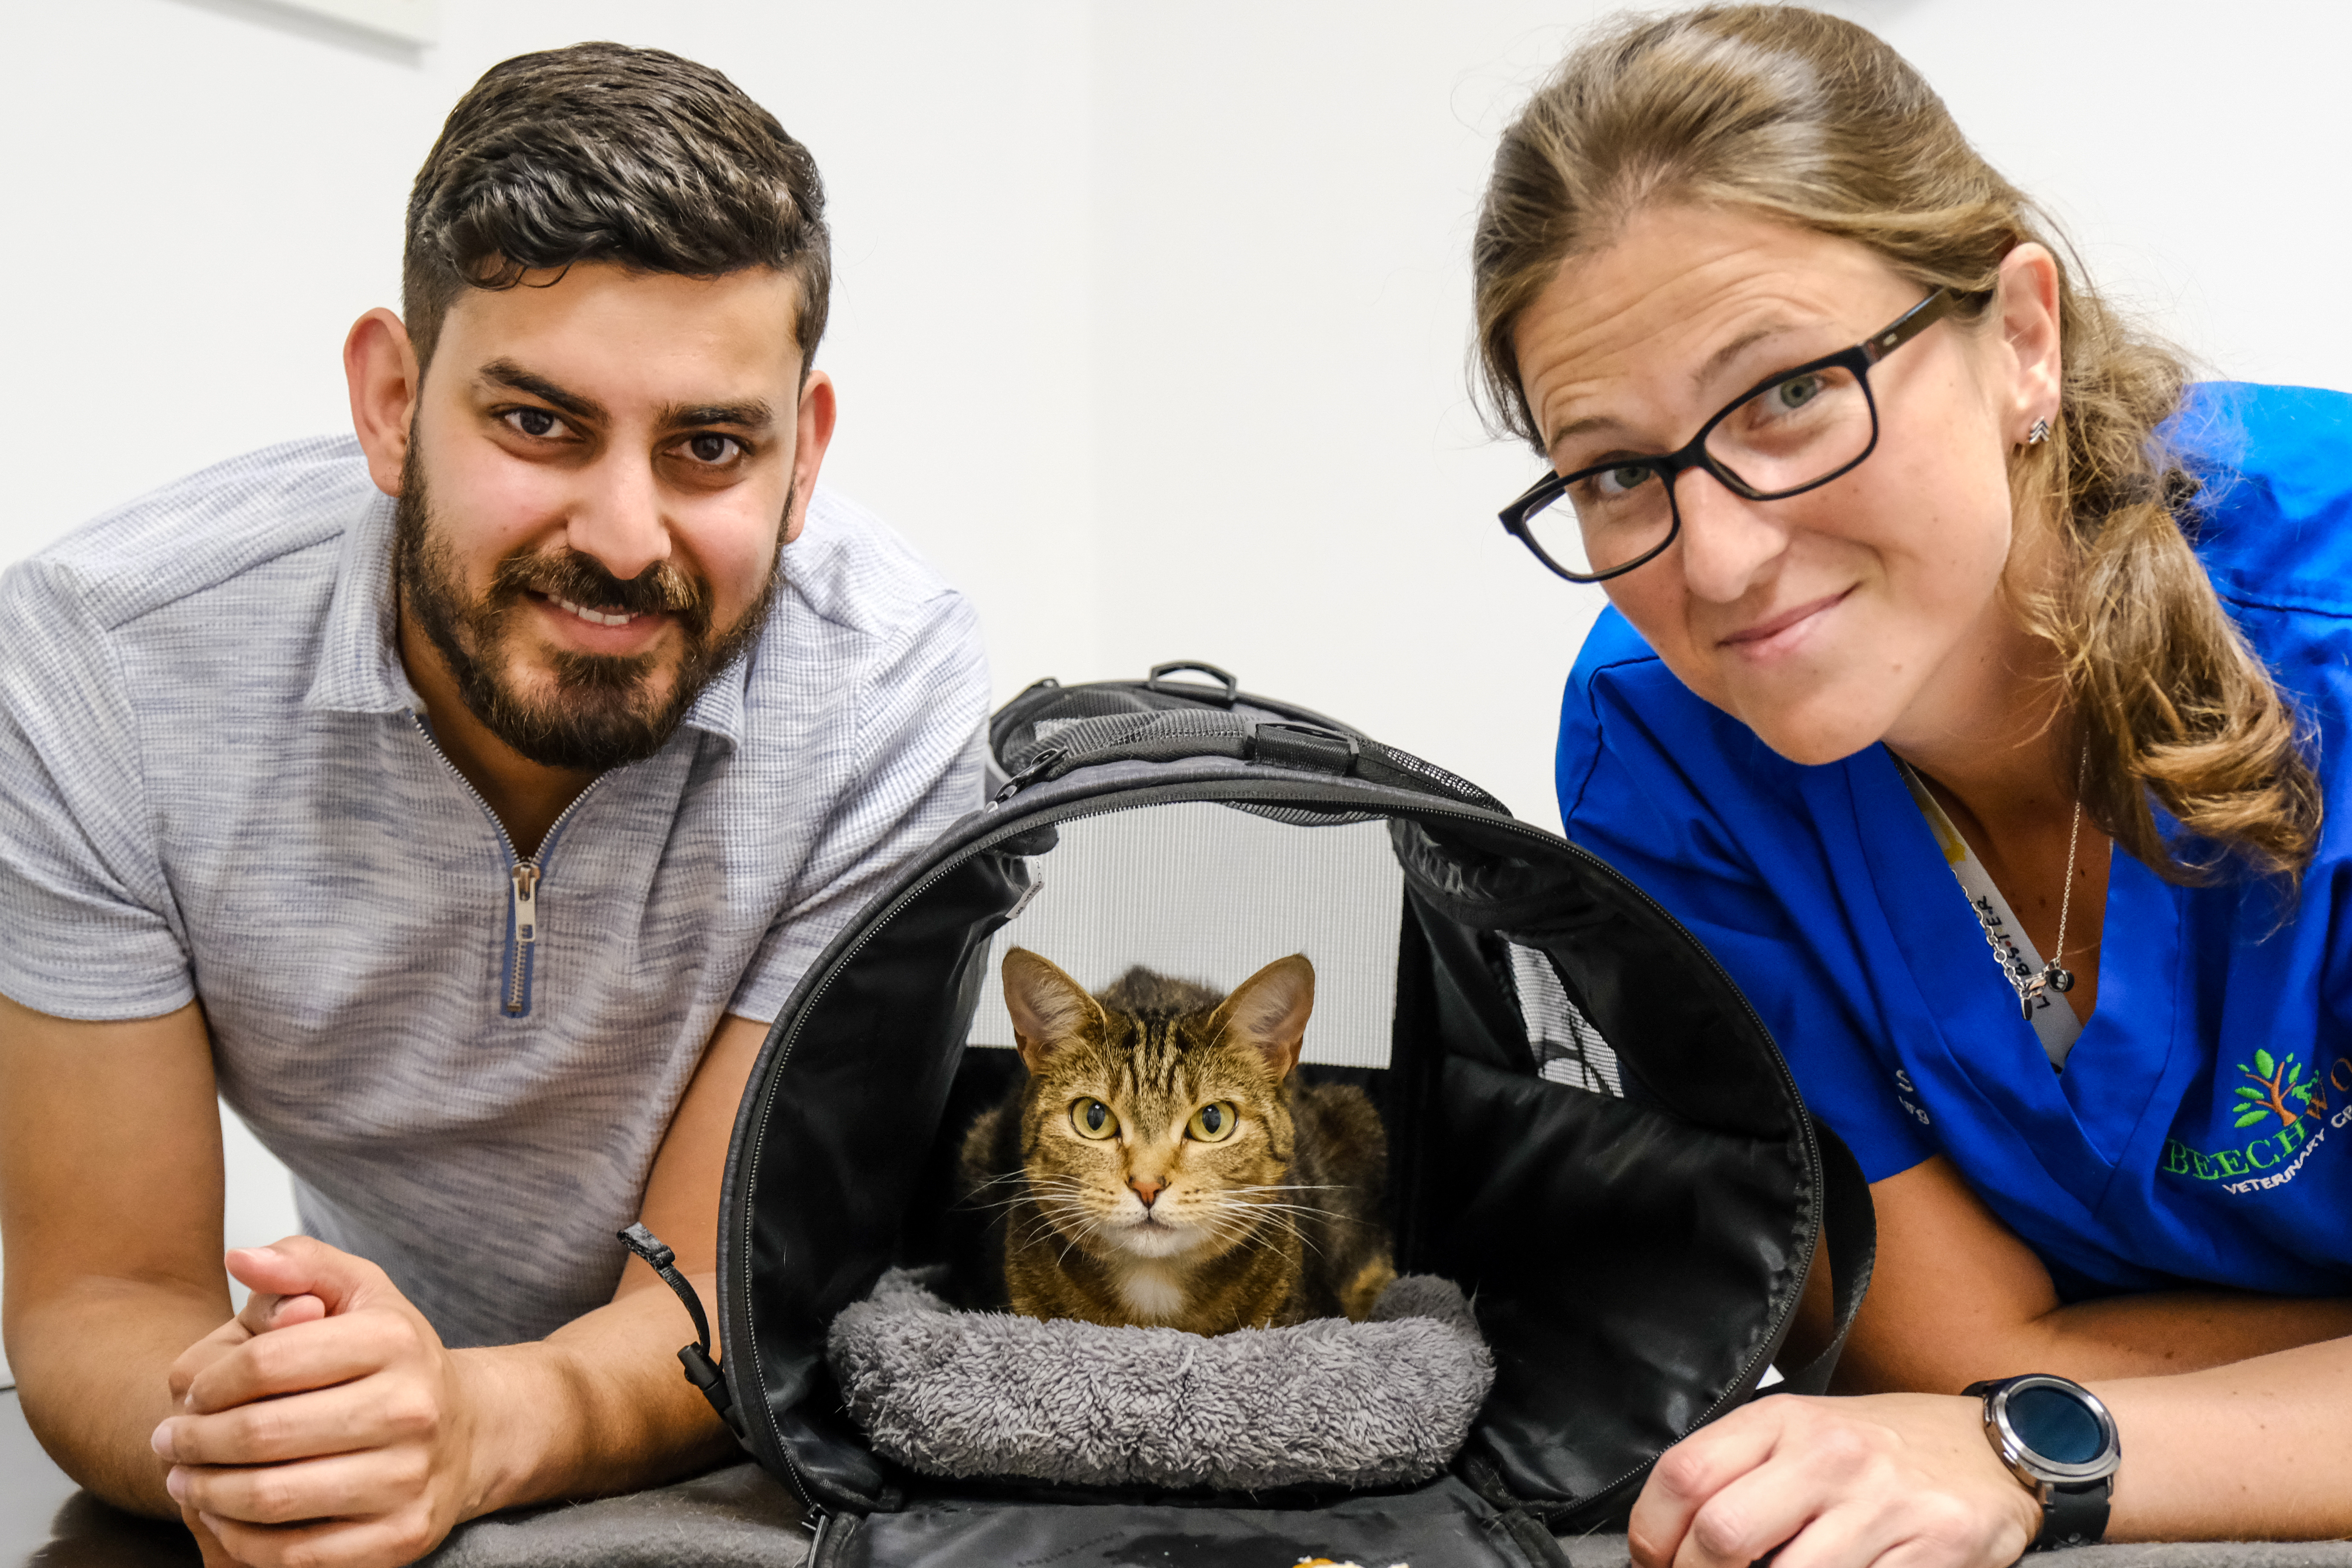 Air-rifle Attack Roxy the Cat Has Miraculous Recovery